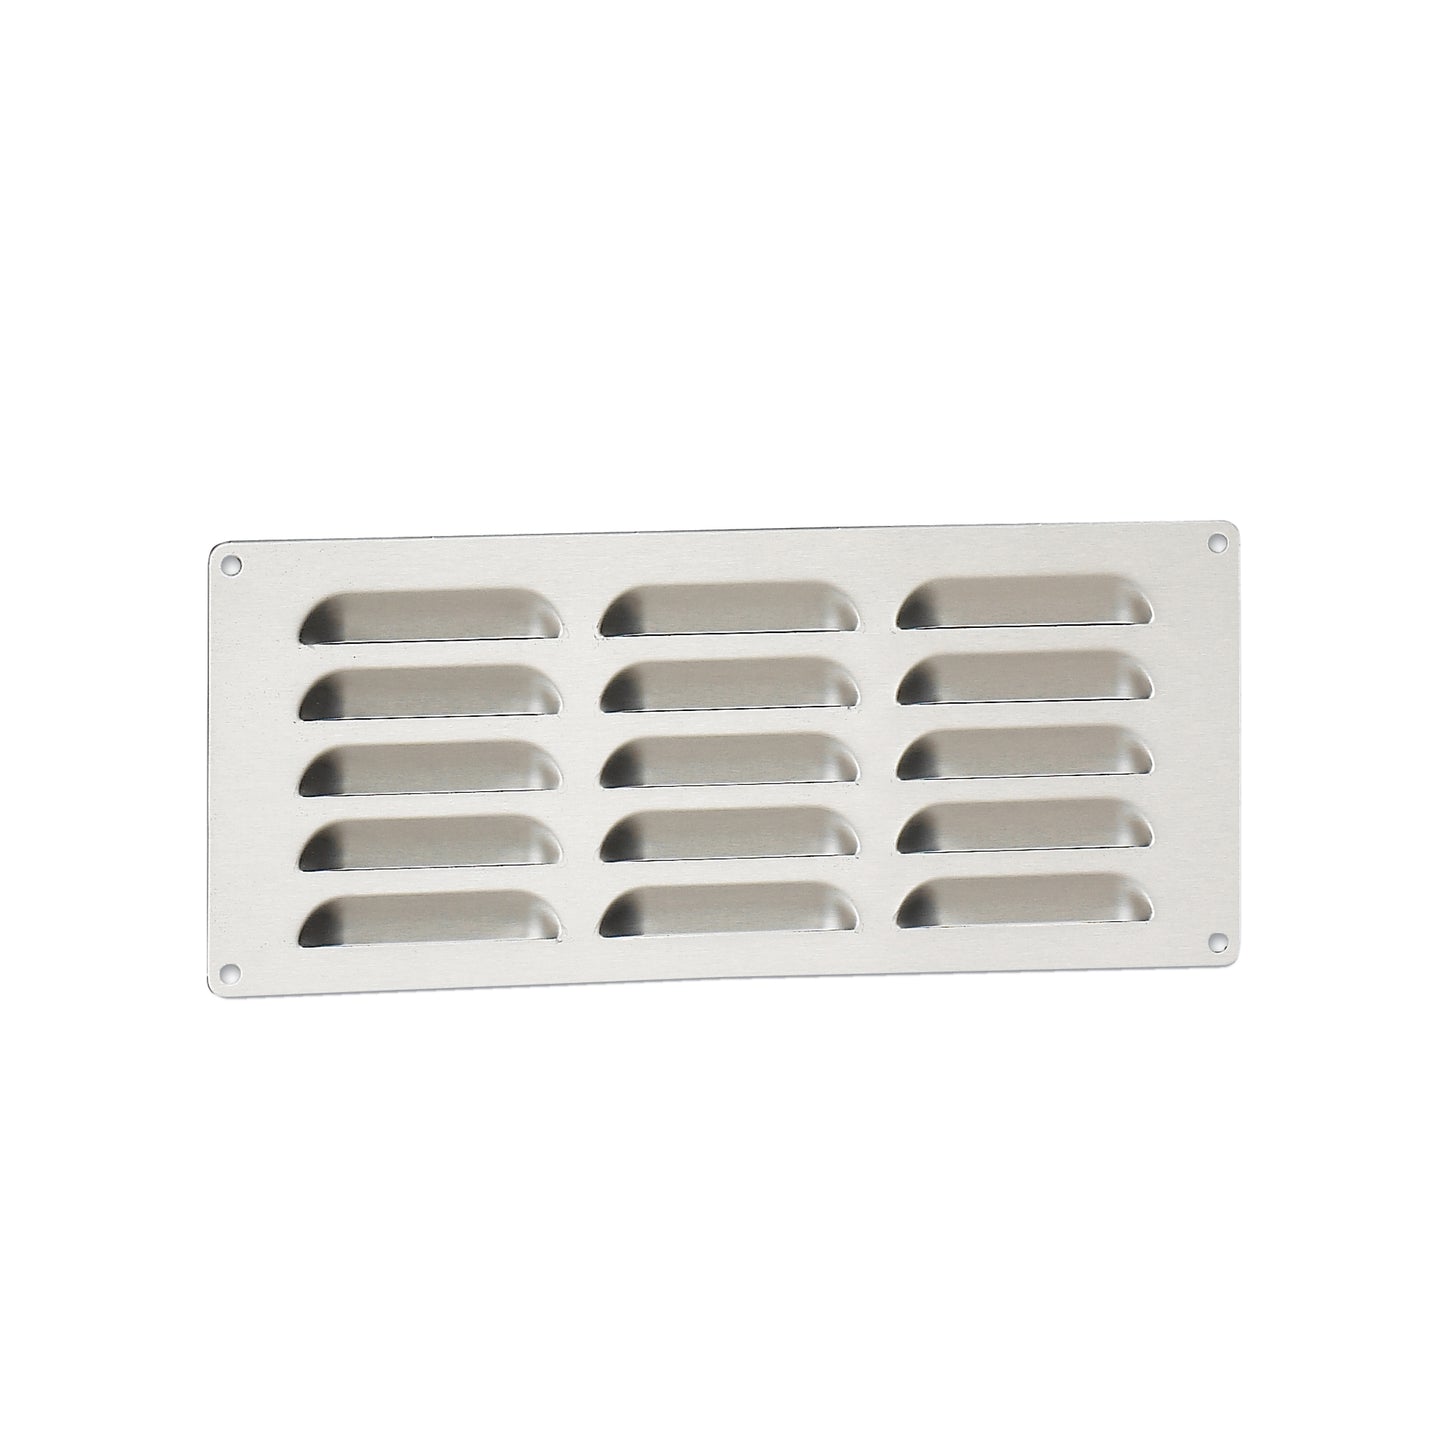 6”h x 14”w FireMagic Louvered Venting Panel (for Island Enclosures) 5510-01